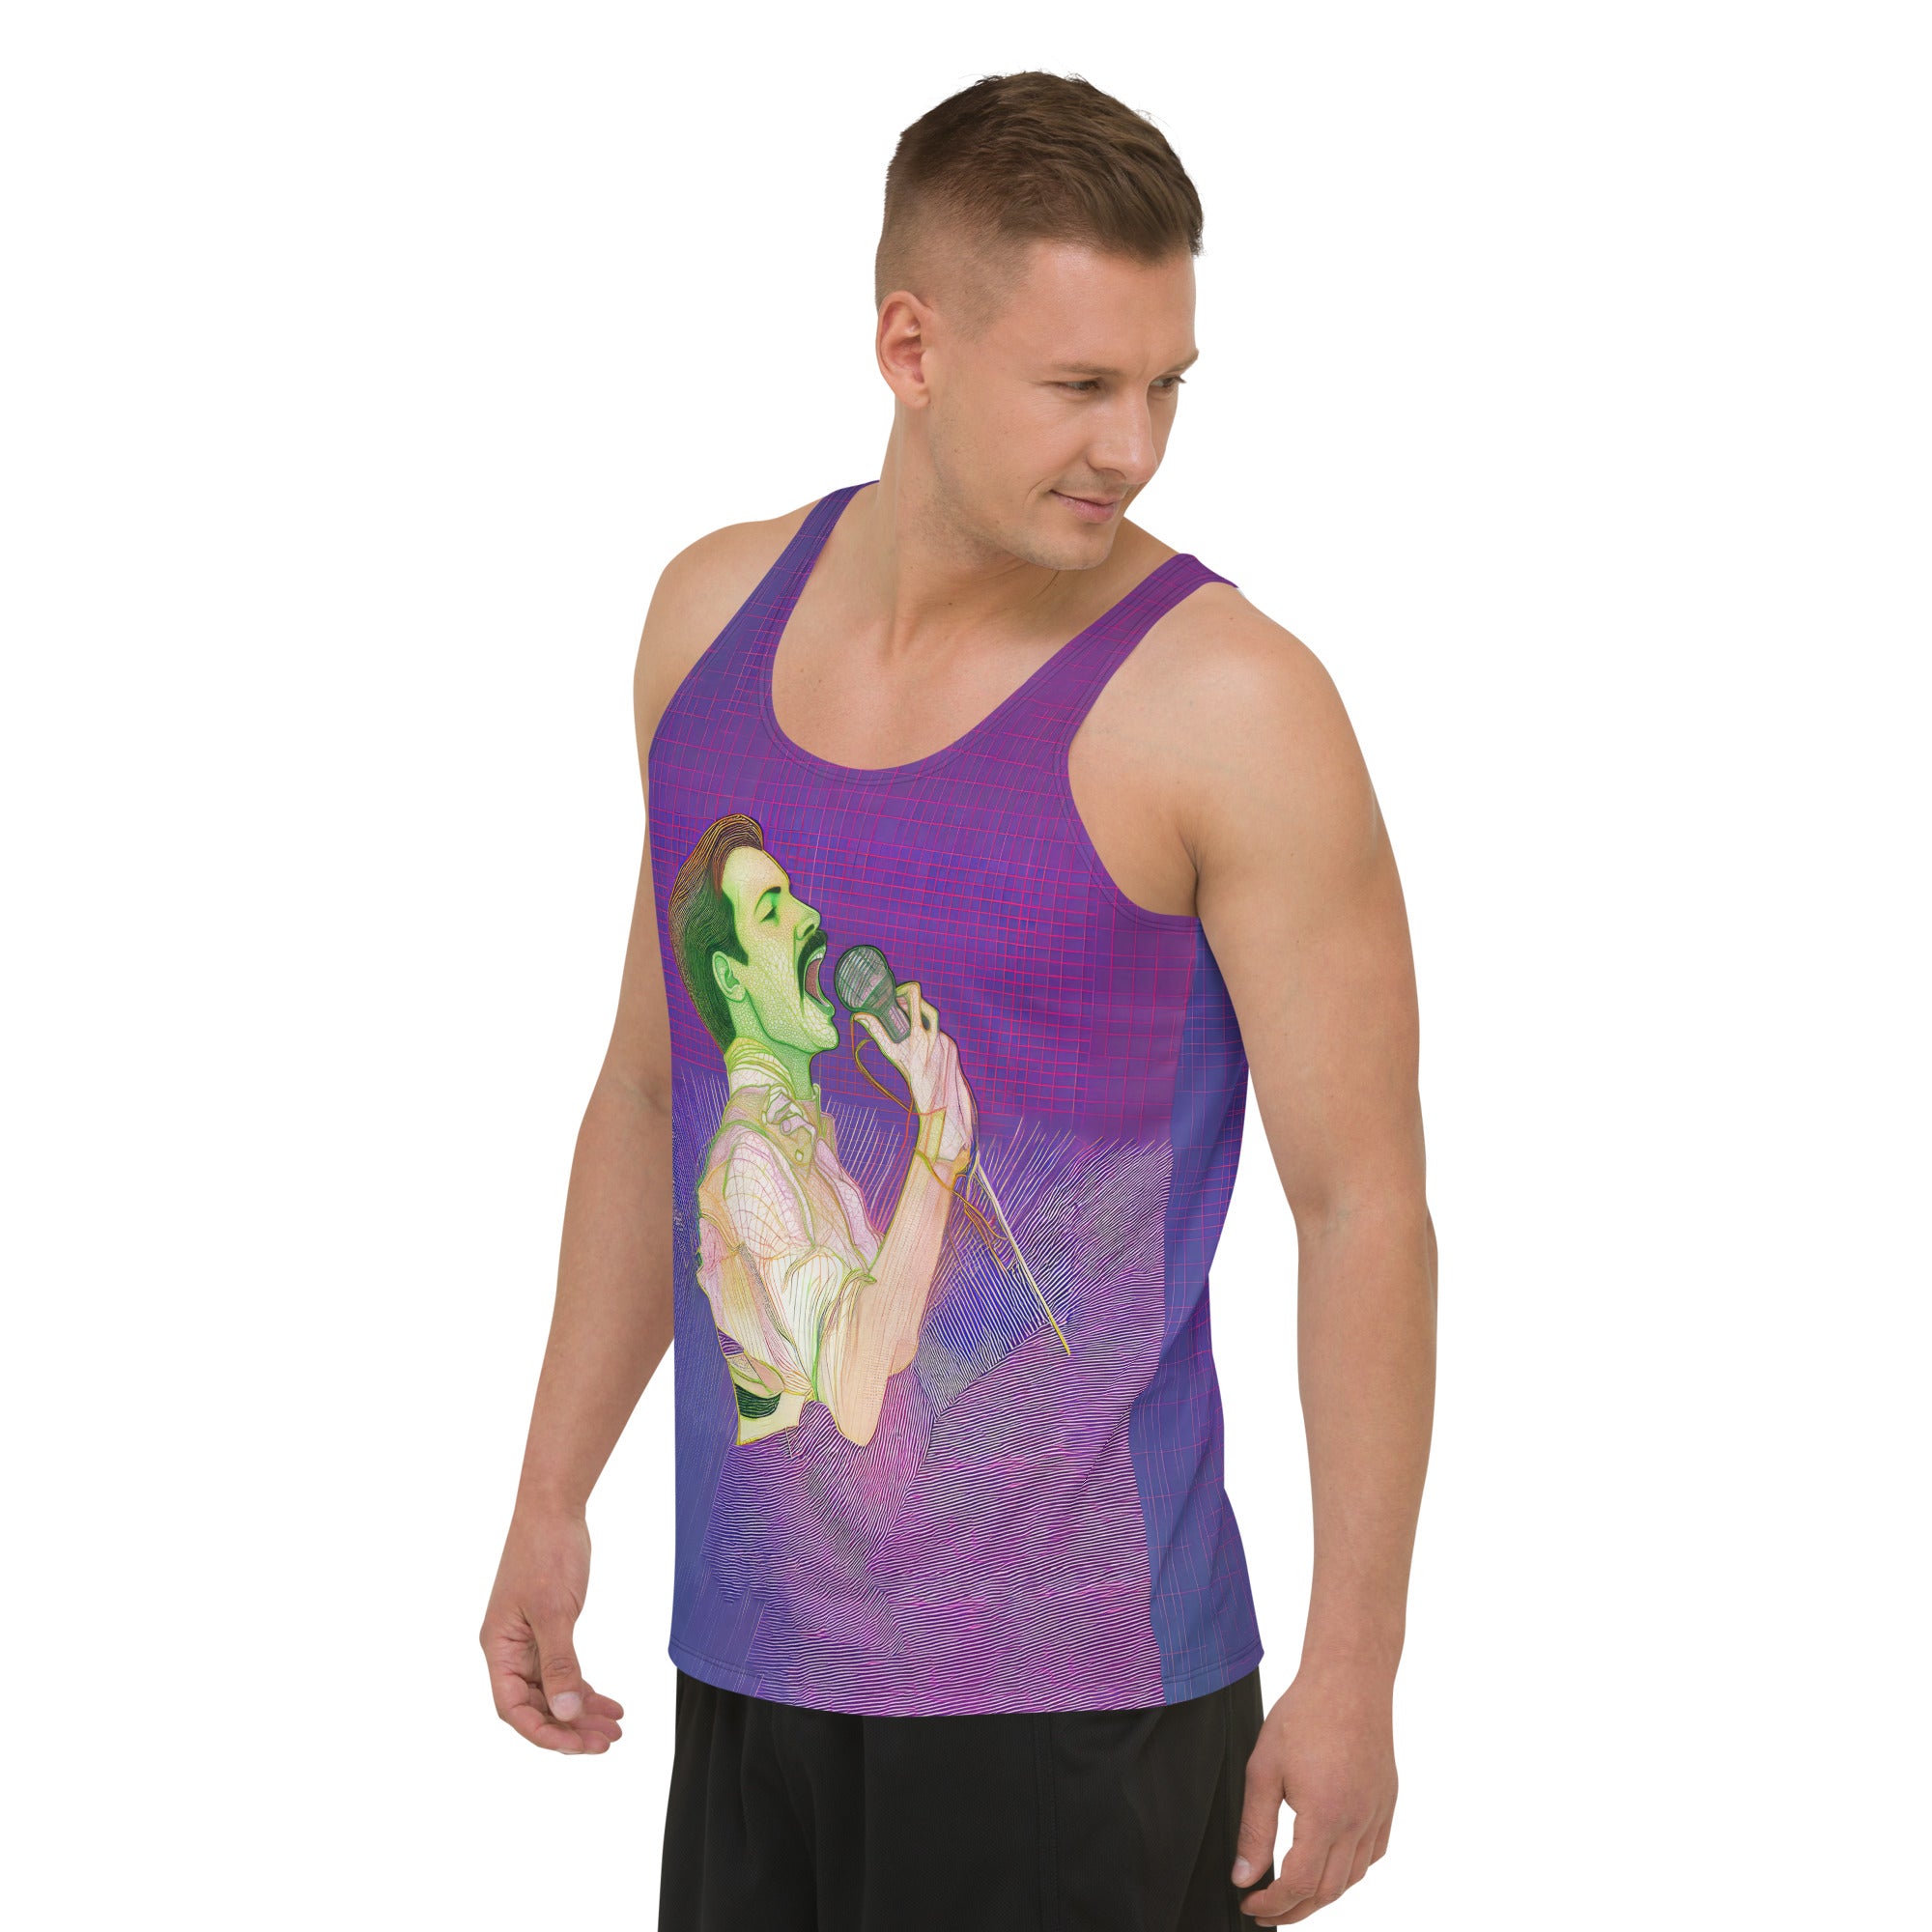 Back view of Harmony Blossom Men's Tank Top showing pattern detail